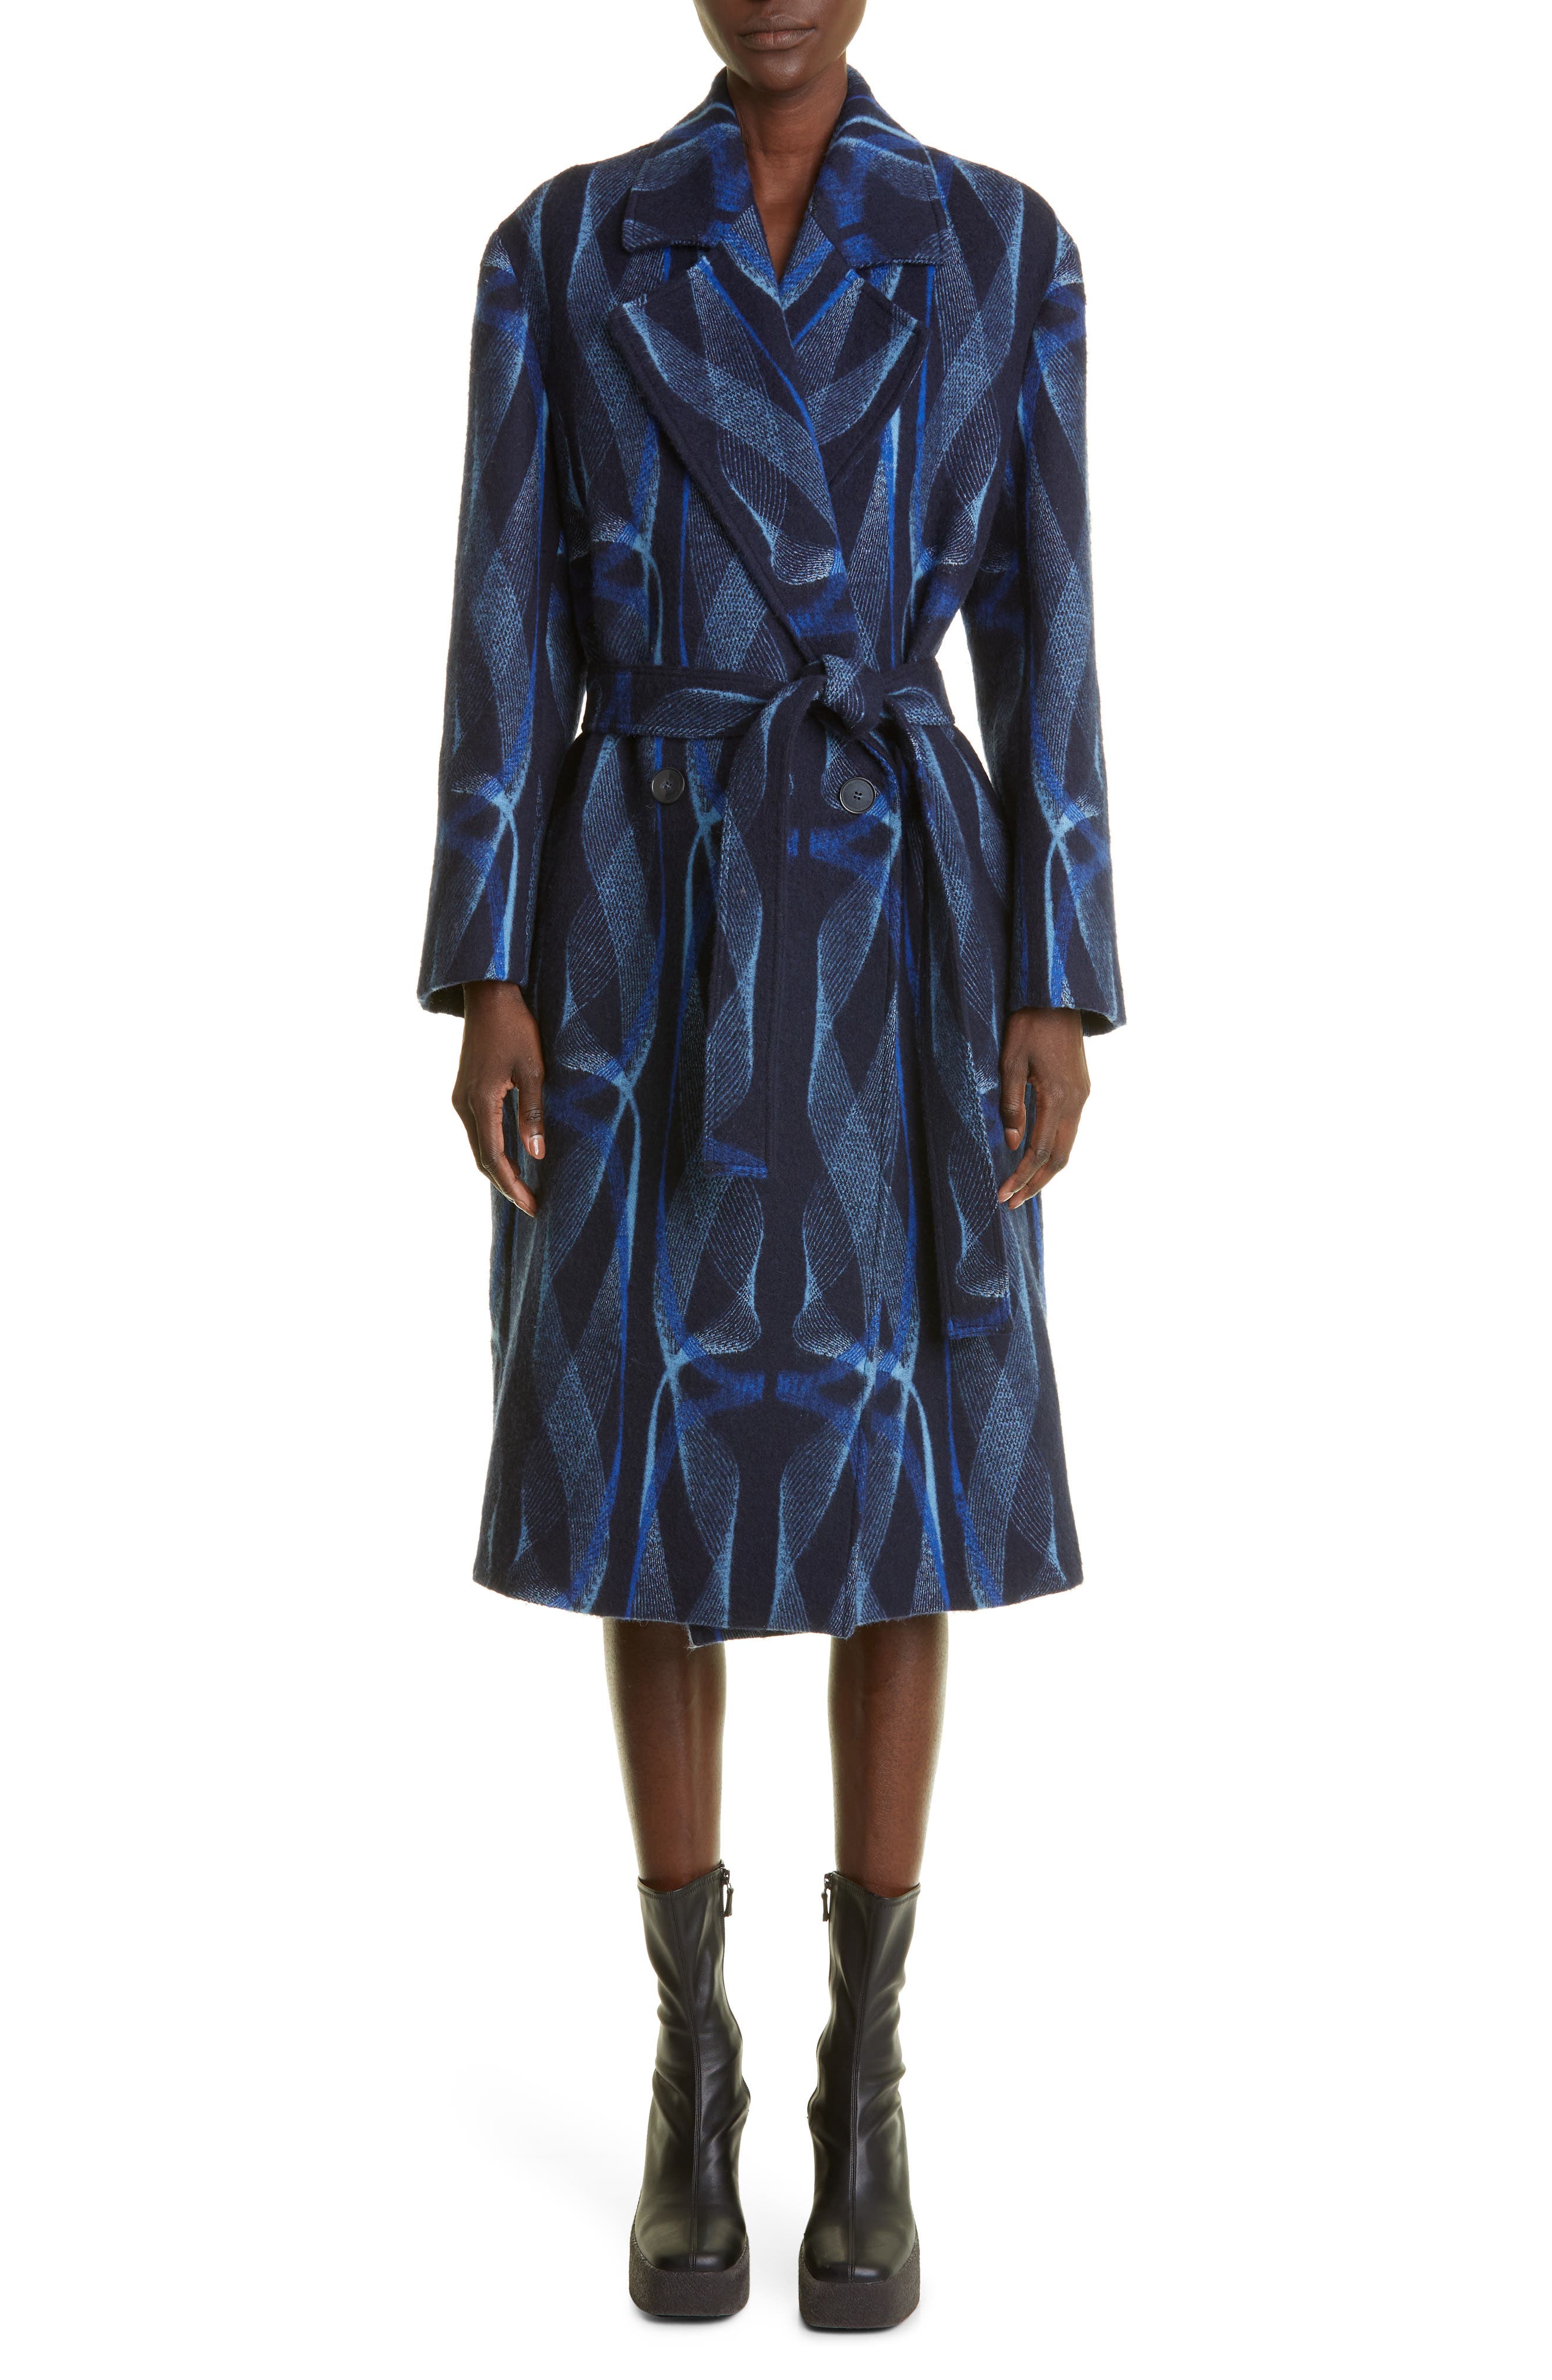 STELLA MCCARTNEY - Light Quilted Trench Coat